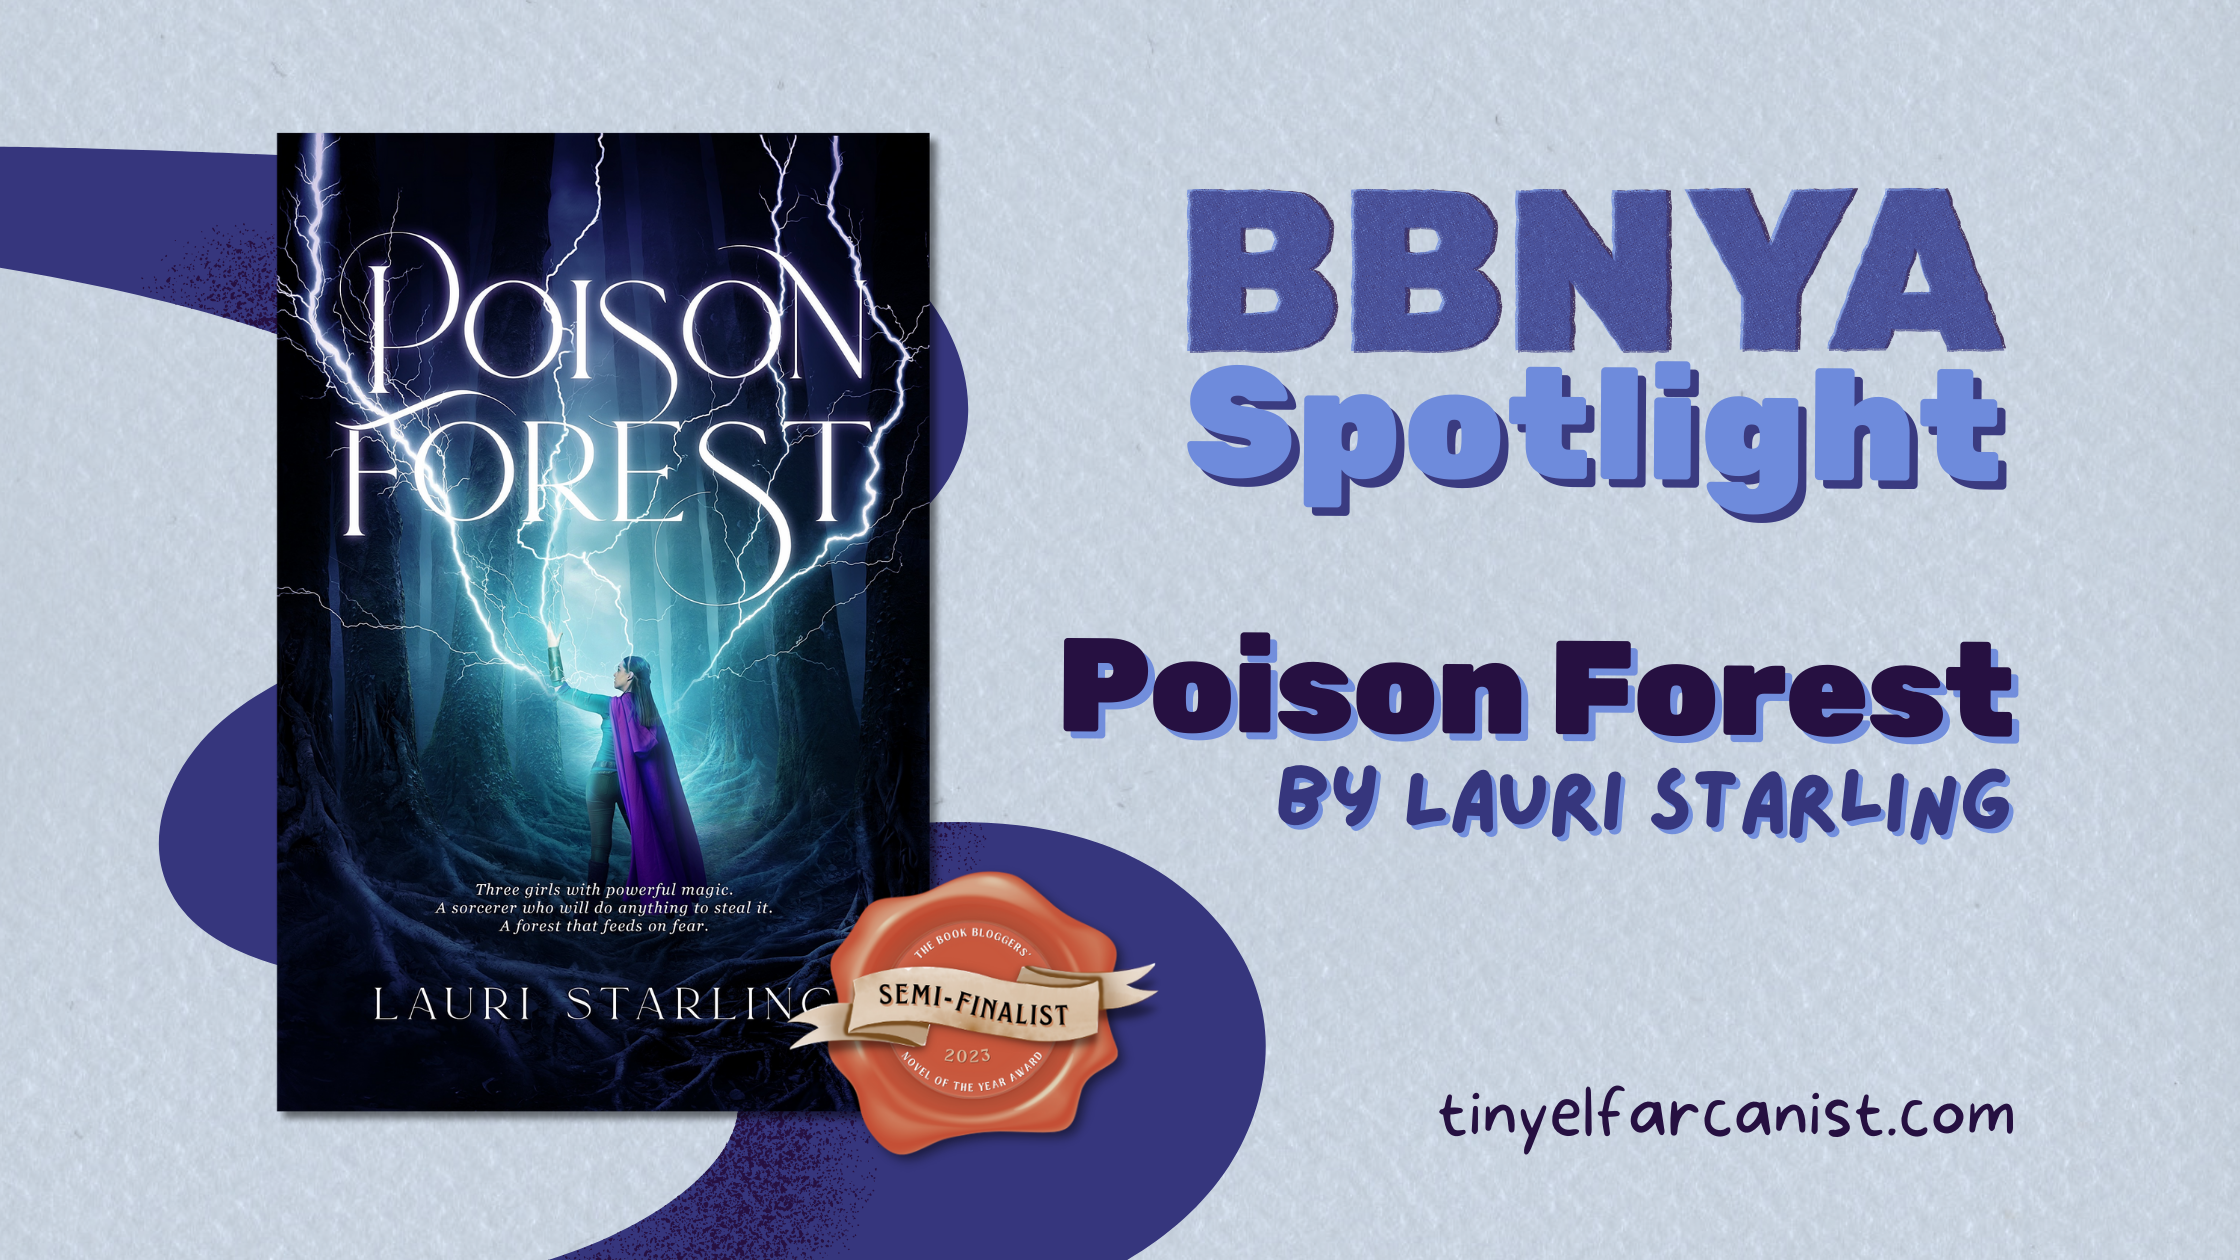 BBNYA Spotlight Poison Forest by Lauri Starling